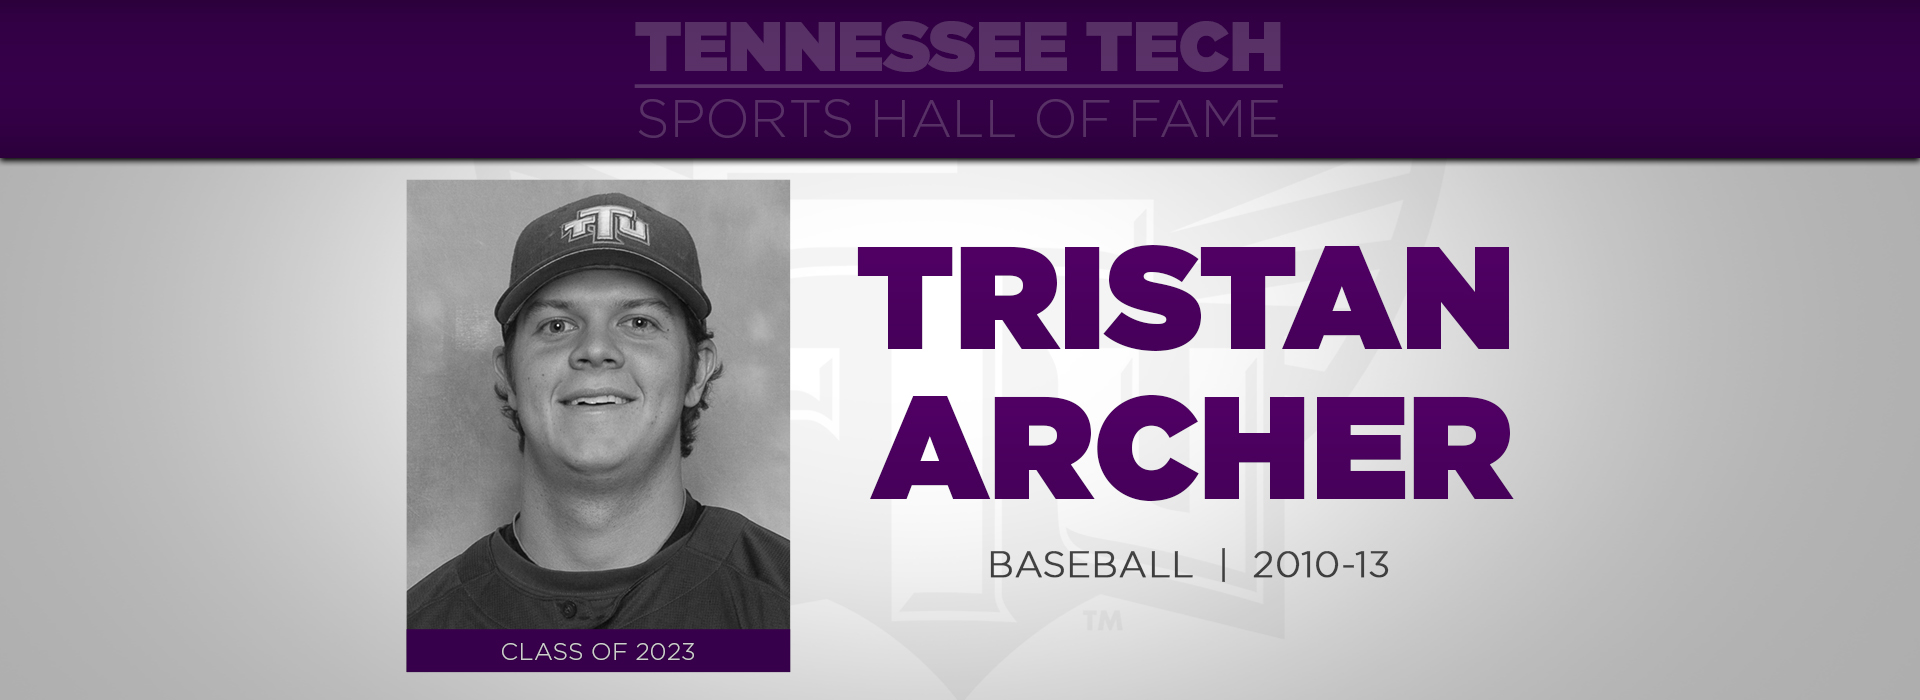 Archer to be inducted into TTU Sports Hall of Fame Friday, Nov. 3